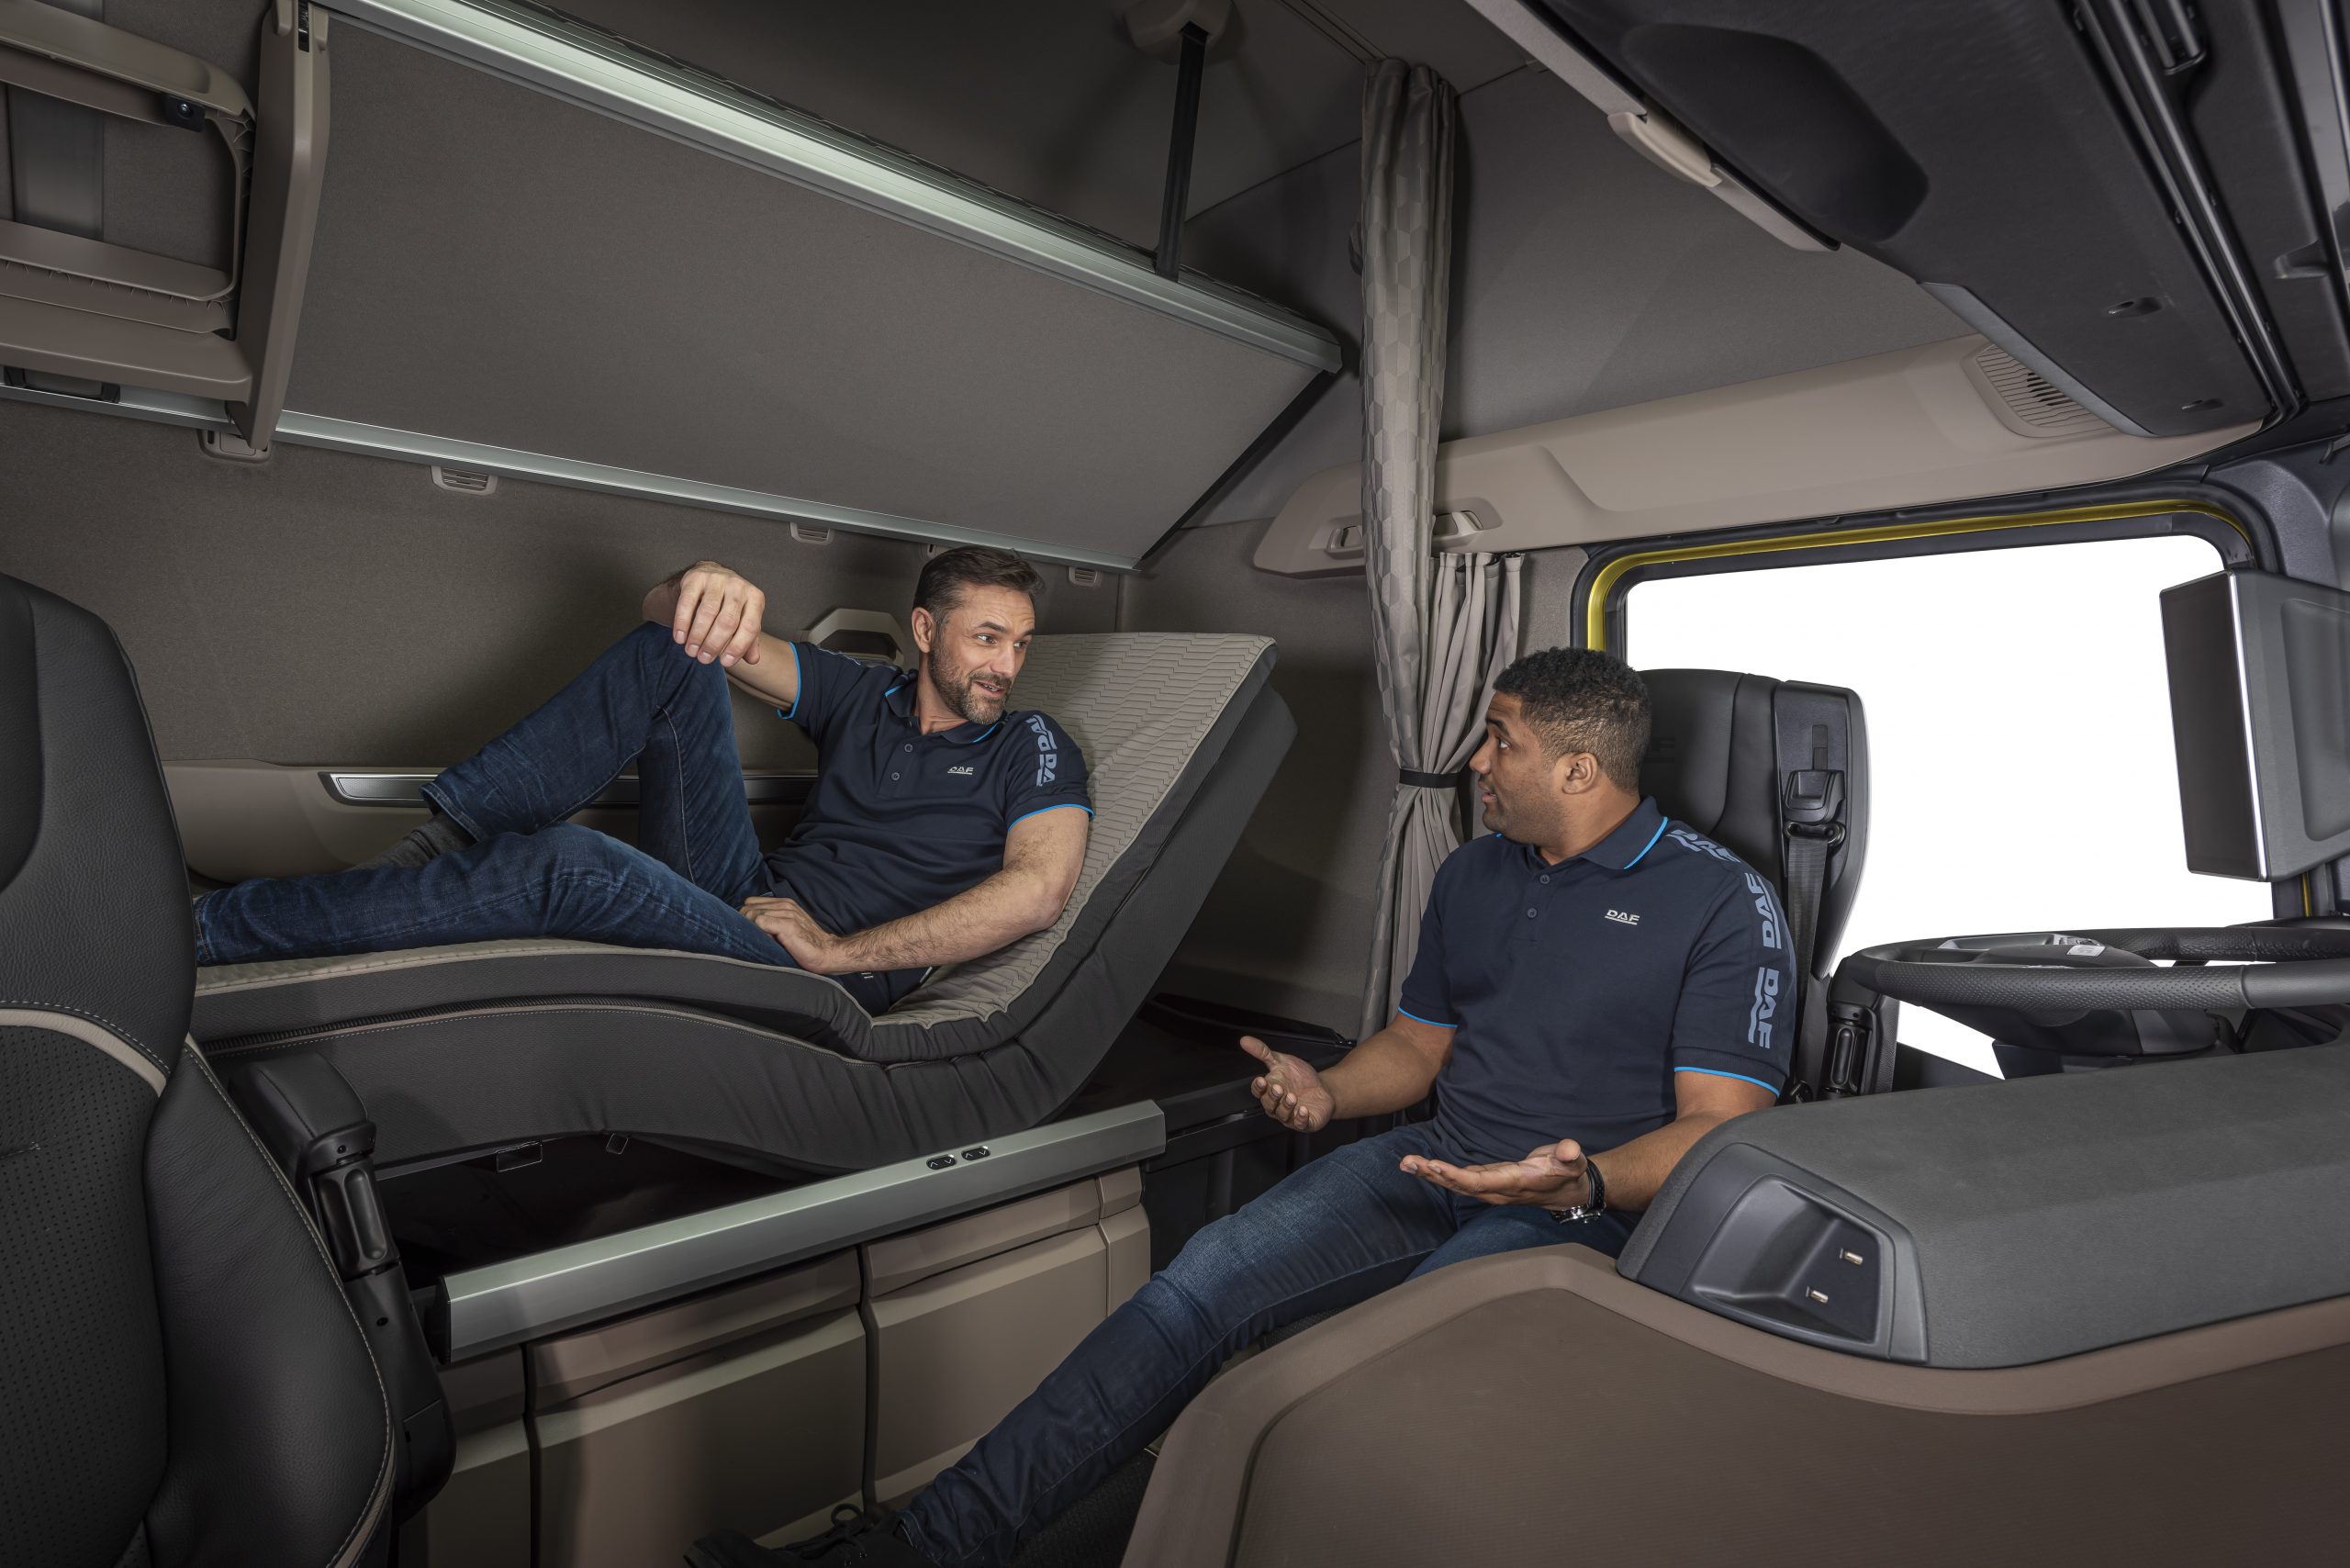 https://nextdrive.de/wp-content/uploads/2021/06/Swivel-chairs-and-relax-bed-for-unmatched-driver-comfort-in-New-Generation-DAF-trucks-scaled.jpg